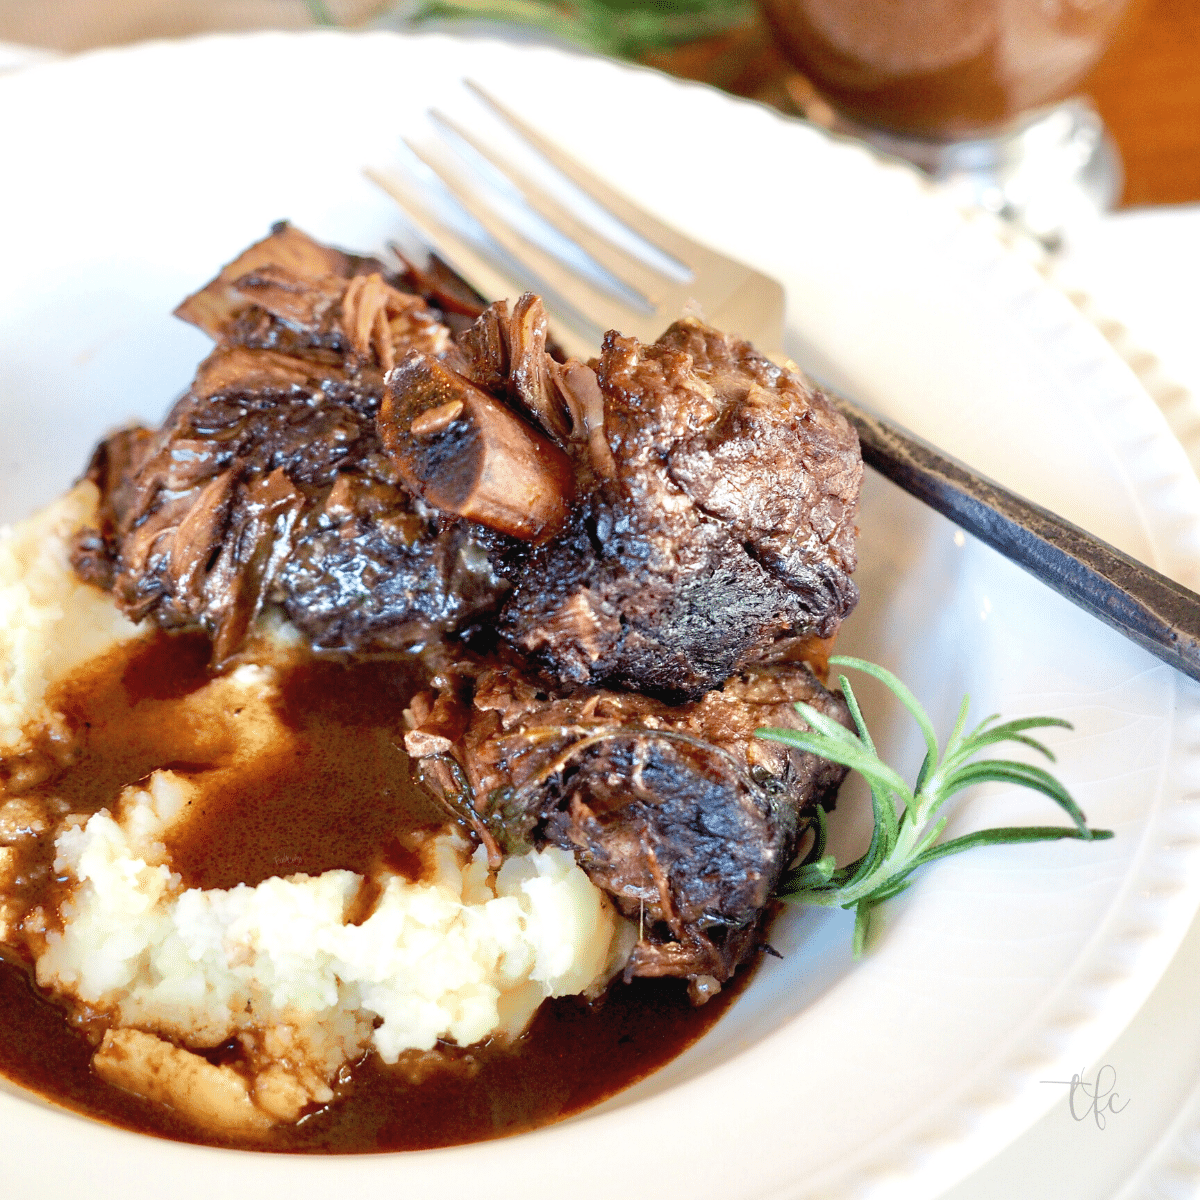 Short ribs over a bed of mashed potatoes with rich gravy.